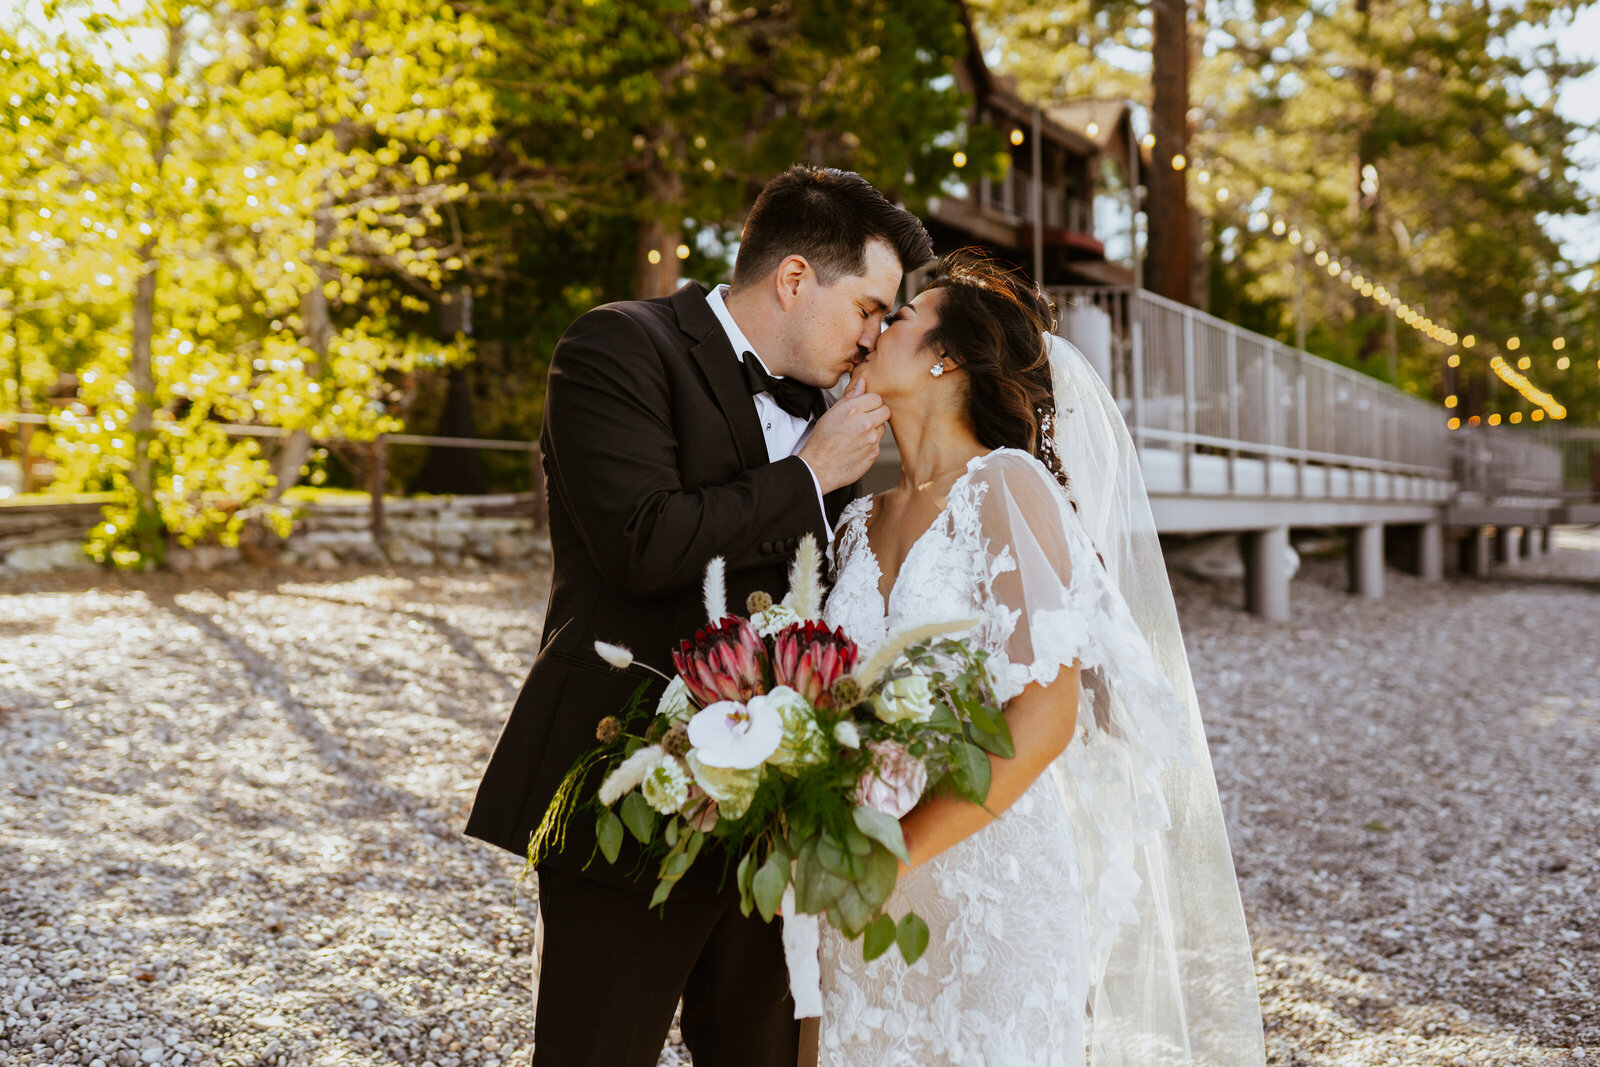 Esmail Wedding South Lake Tahoe West Shore Cafe Photography Raquel King Photography395